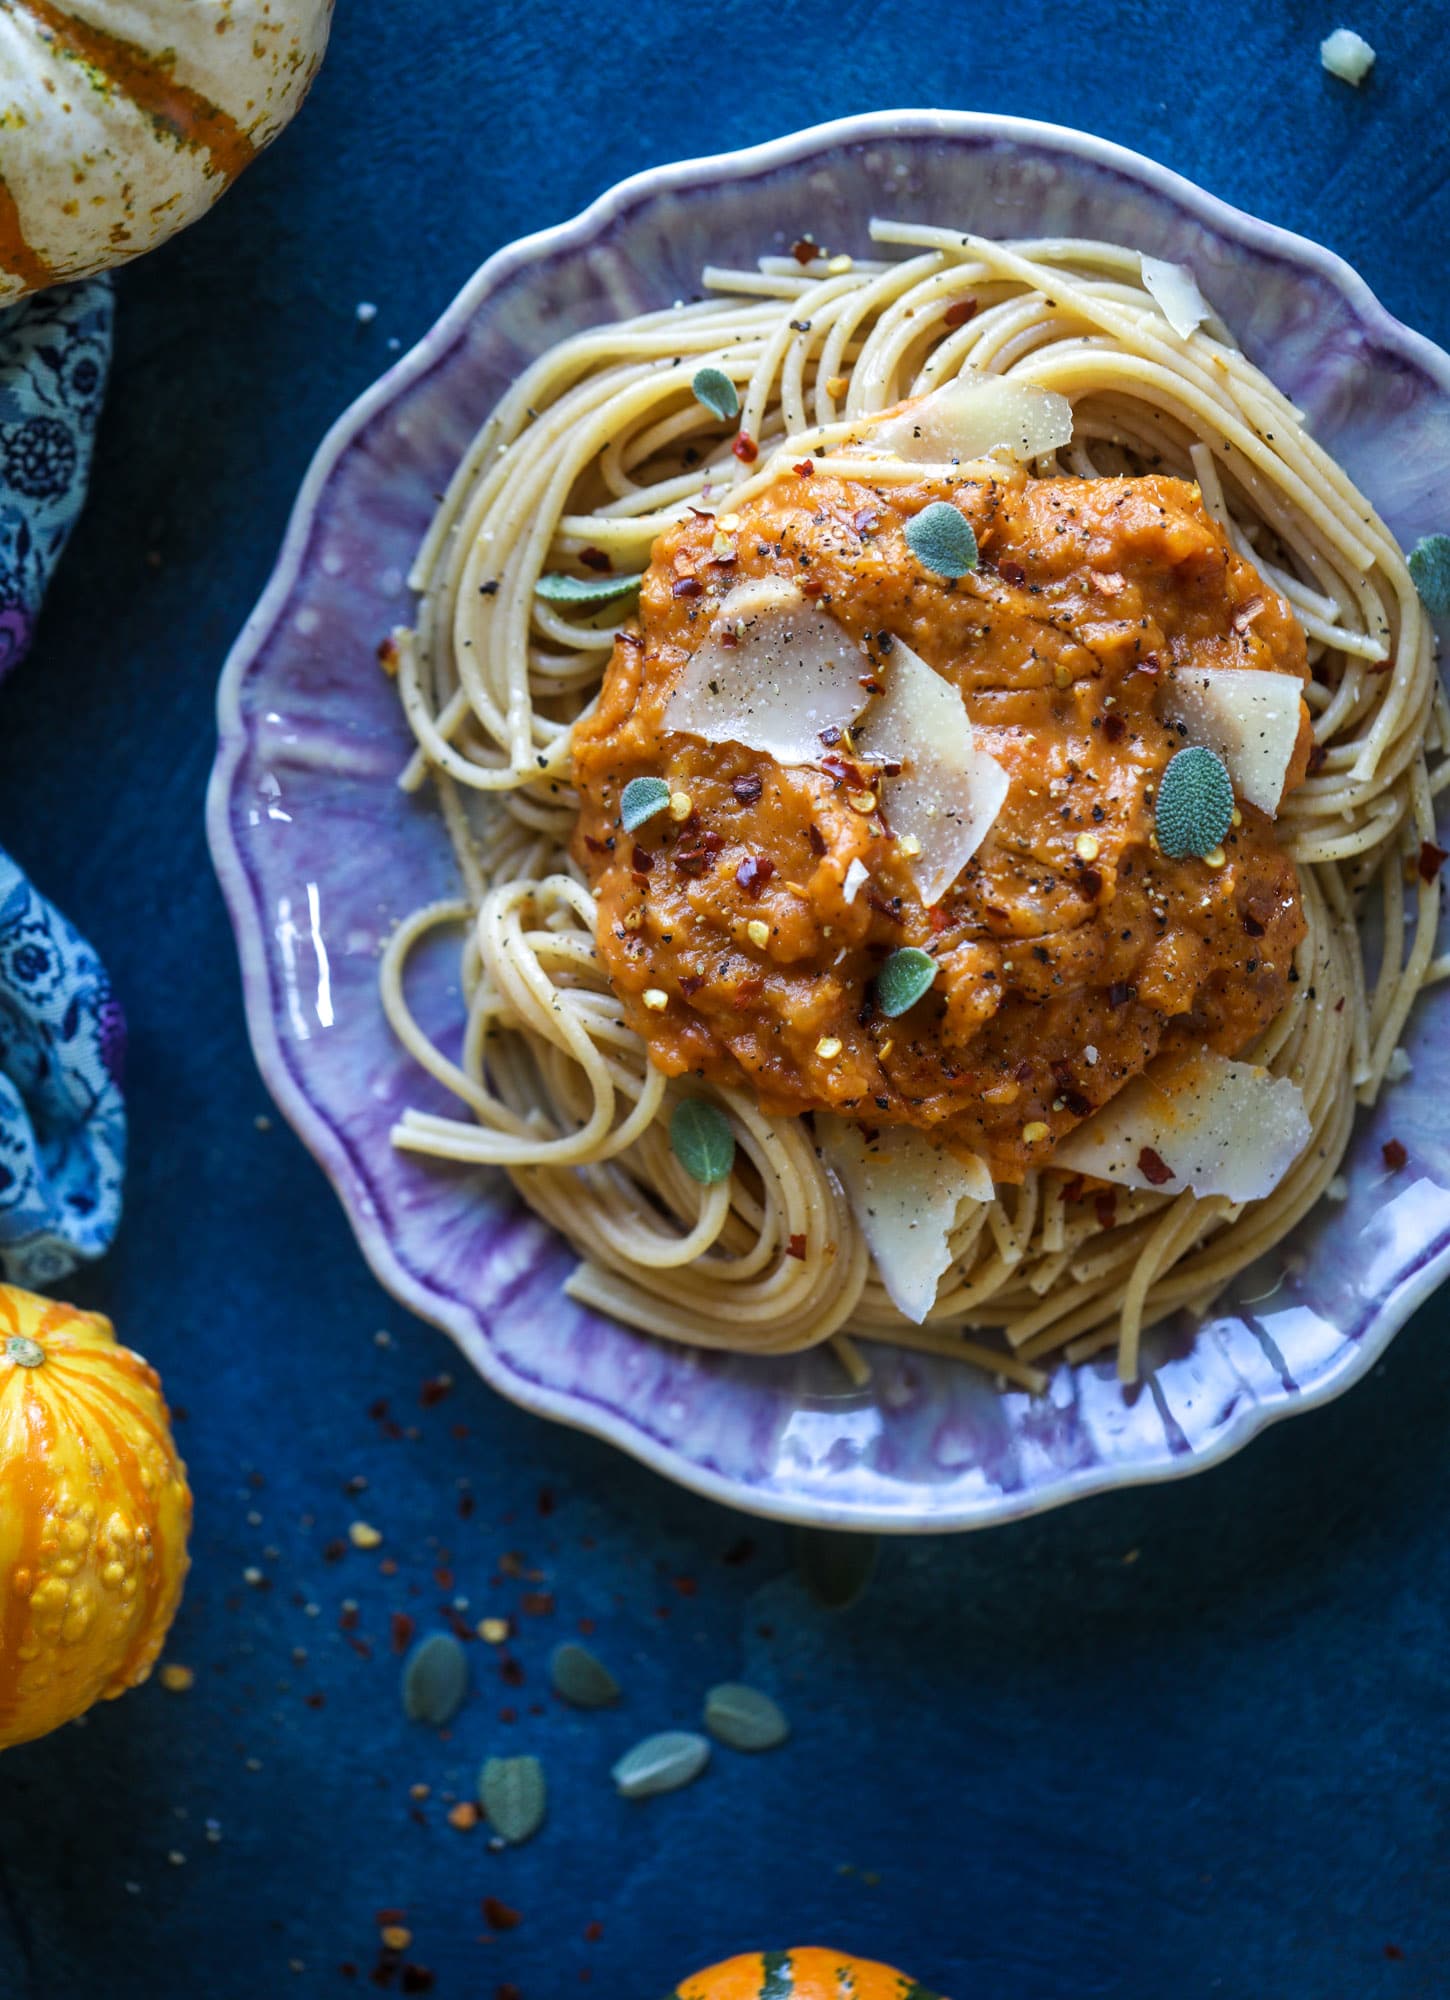 This butternut squash pasta sauce is heaven for an October dinner! Fire roasted tomatoes, butternut squash, pumpkin, sage, spice and parmesan all come together to create a delicious, simmered pot of sauce to blanket your favorite pasta! I howsweeteats.com #butternut #squash #pasta #sauce